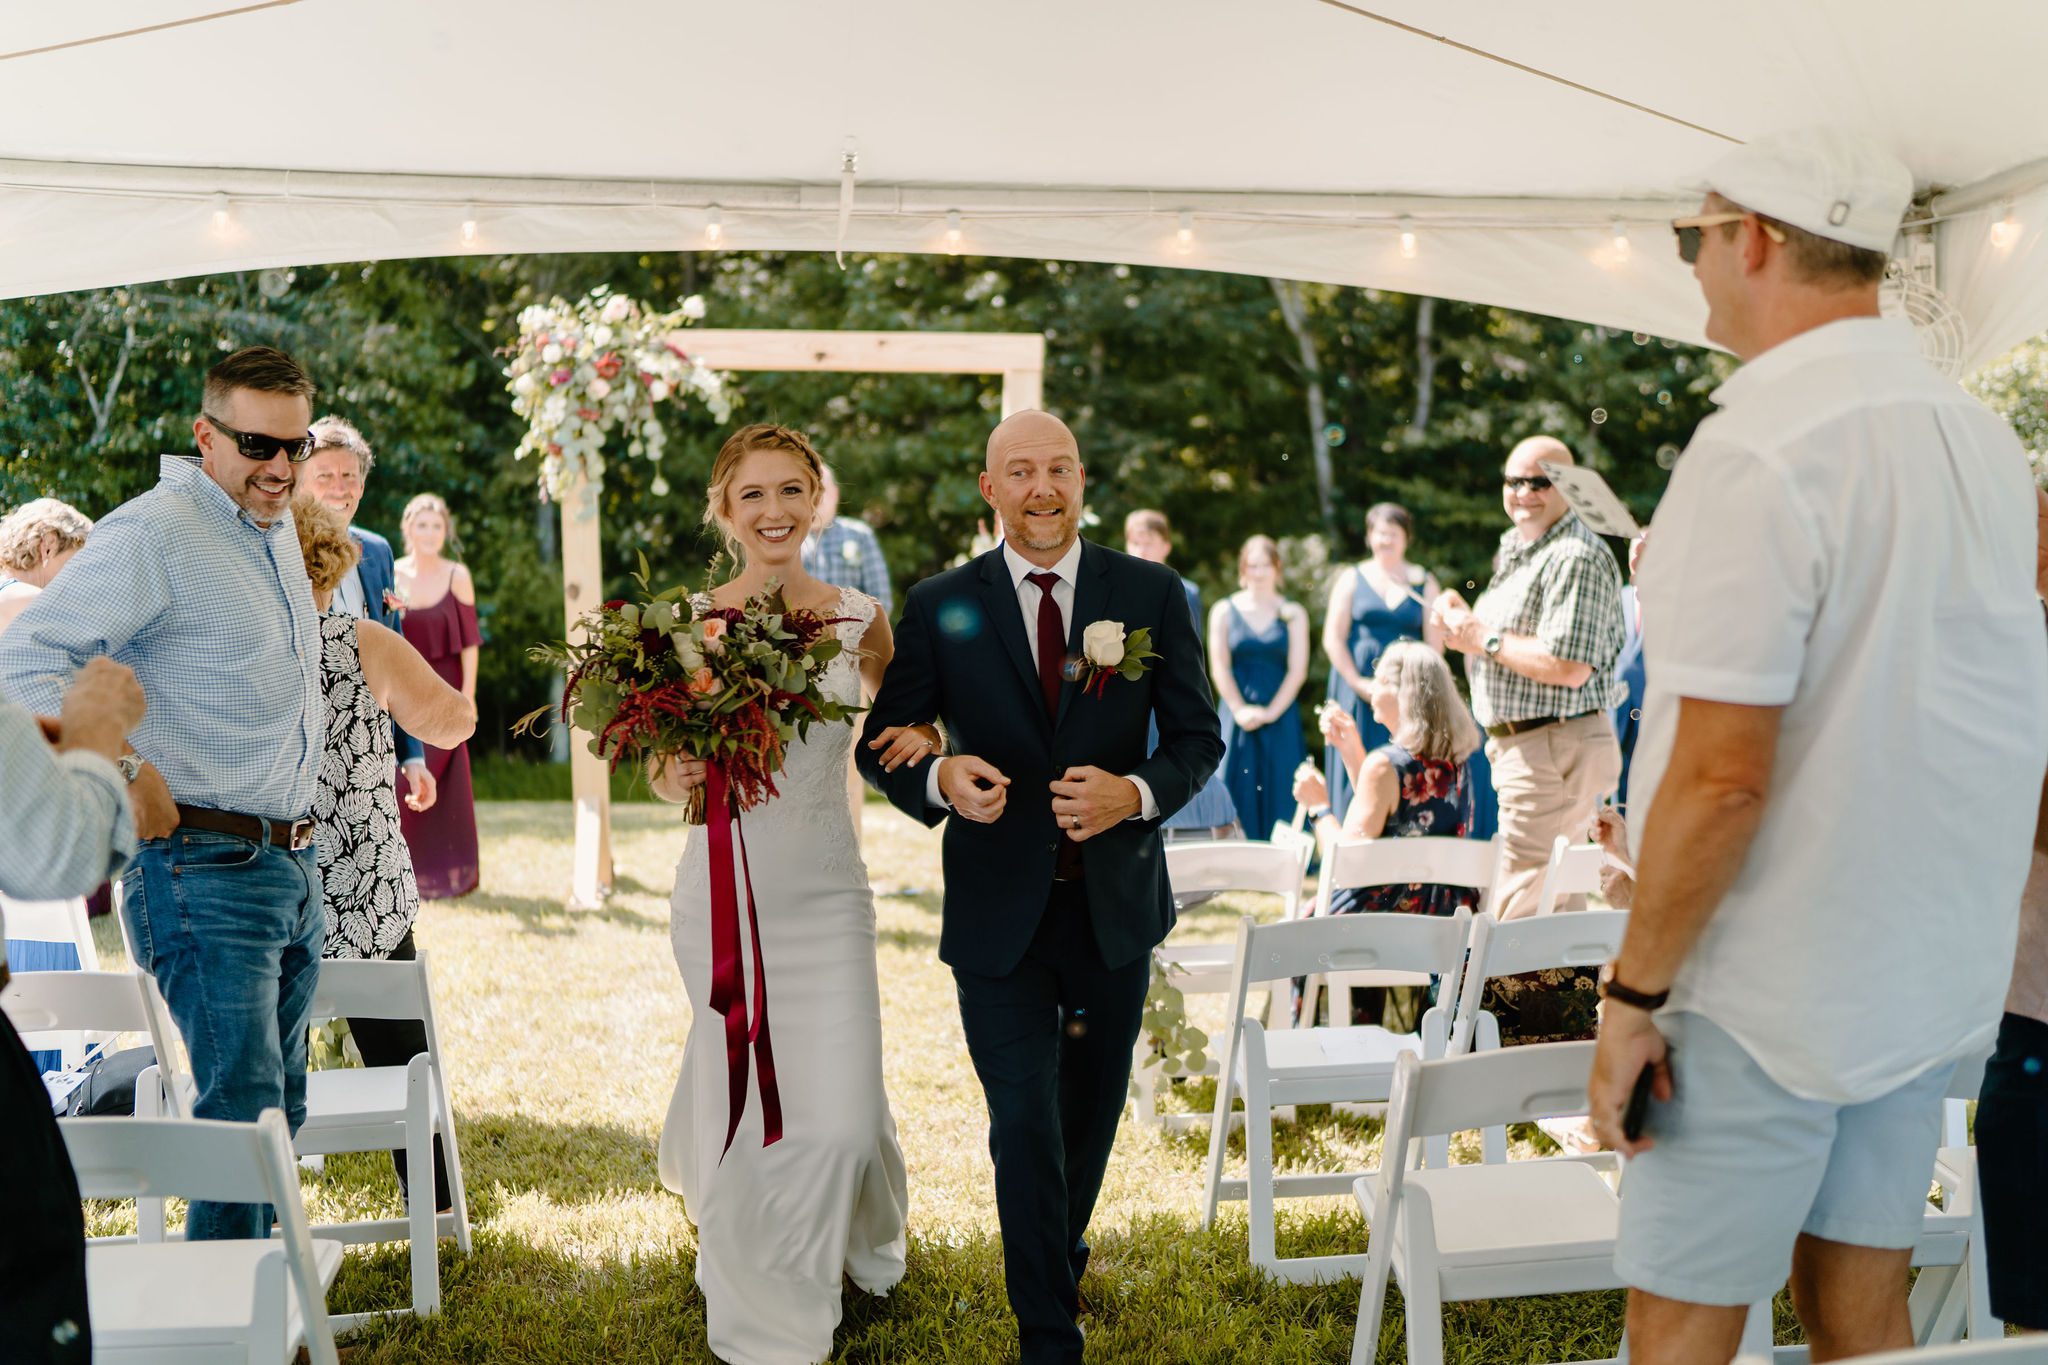 Beautiful bride and groom during their outdoor wedding day with fall themed wedding decor and unique wedding reception location